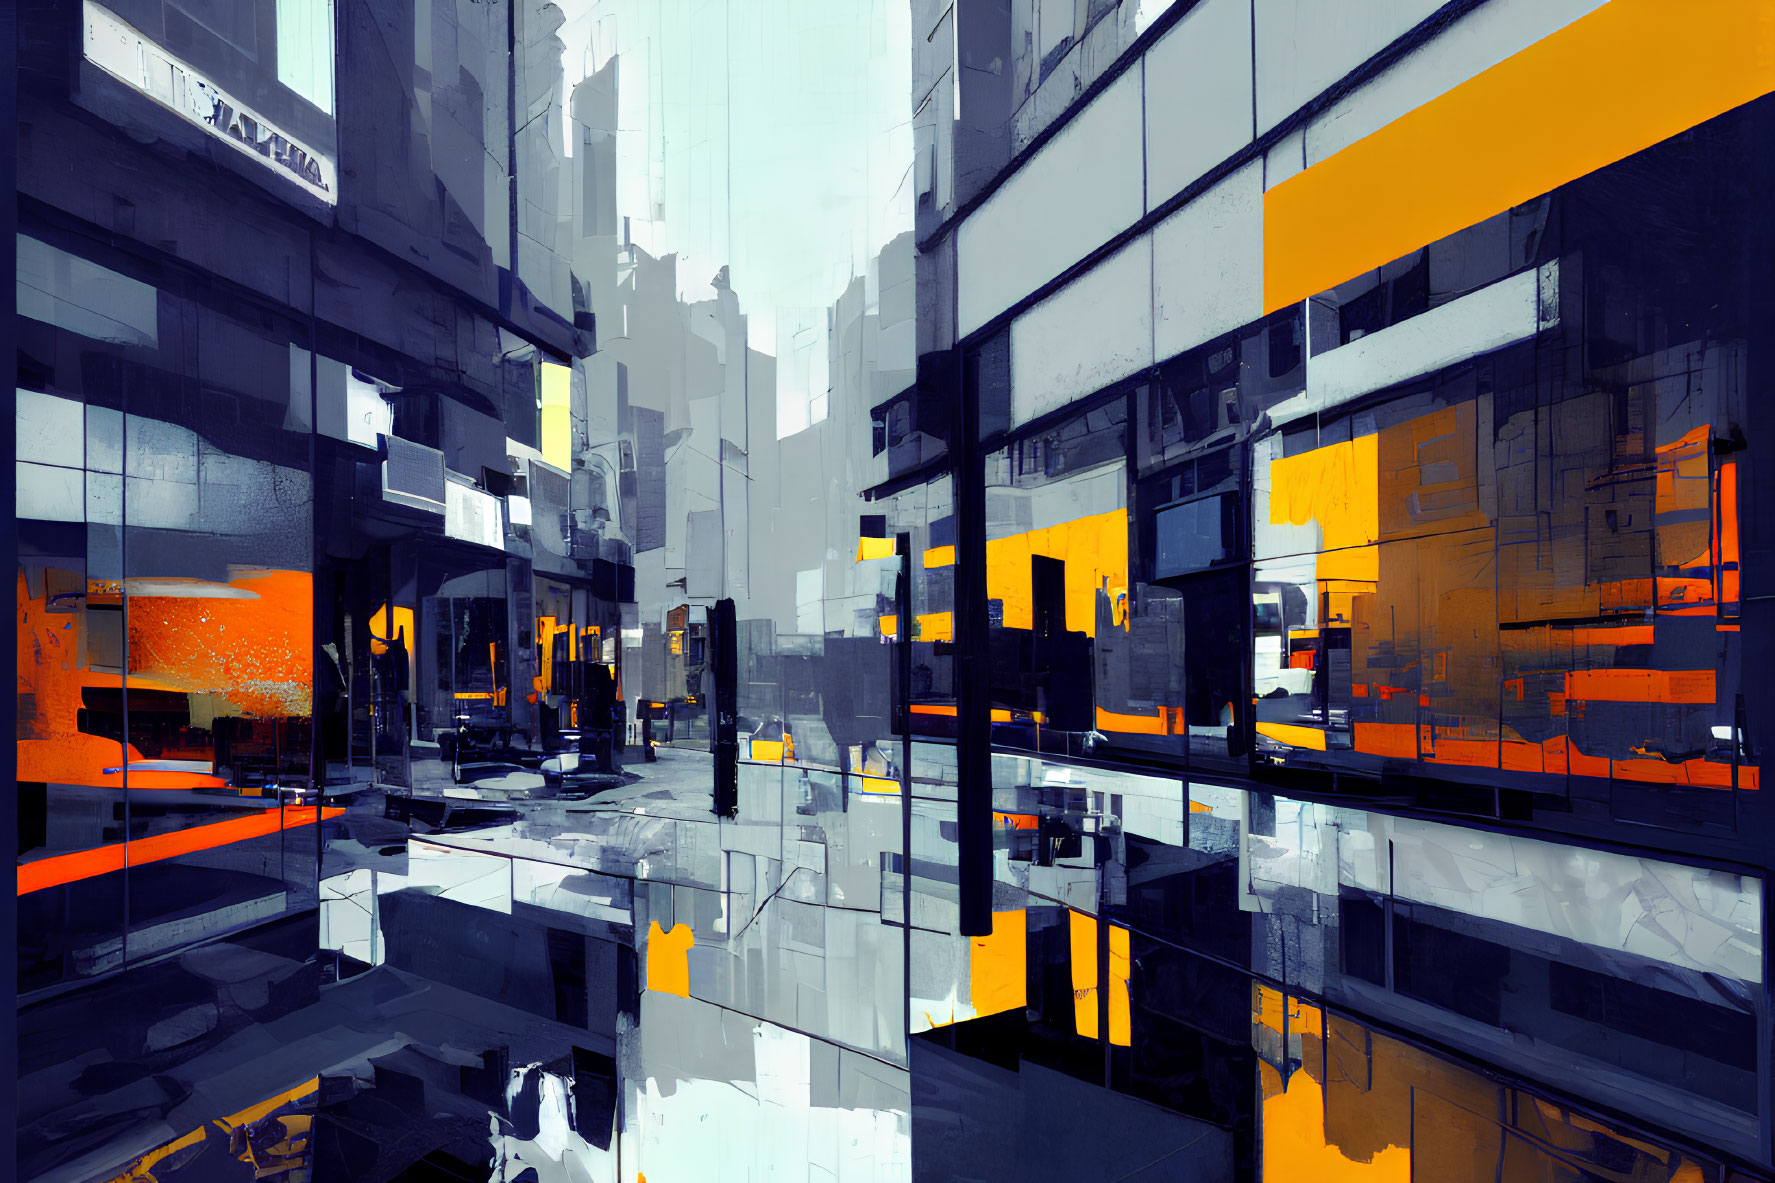 Urban environment digital art with blue and orange tones, reflective surfaces, and geometric shapes